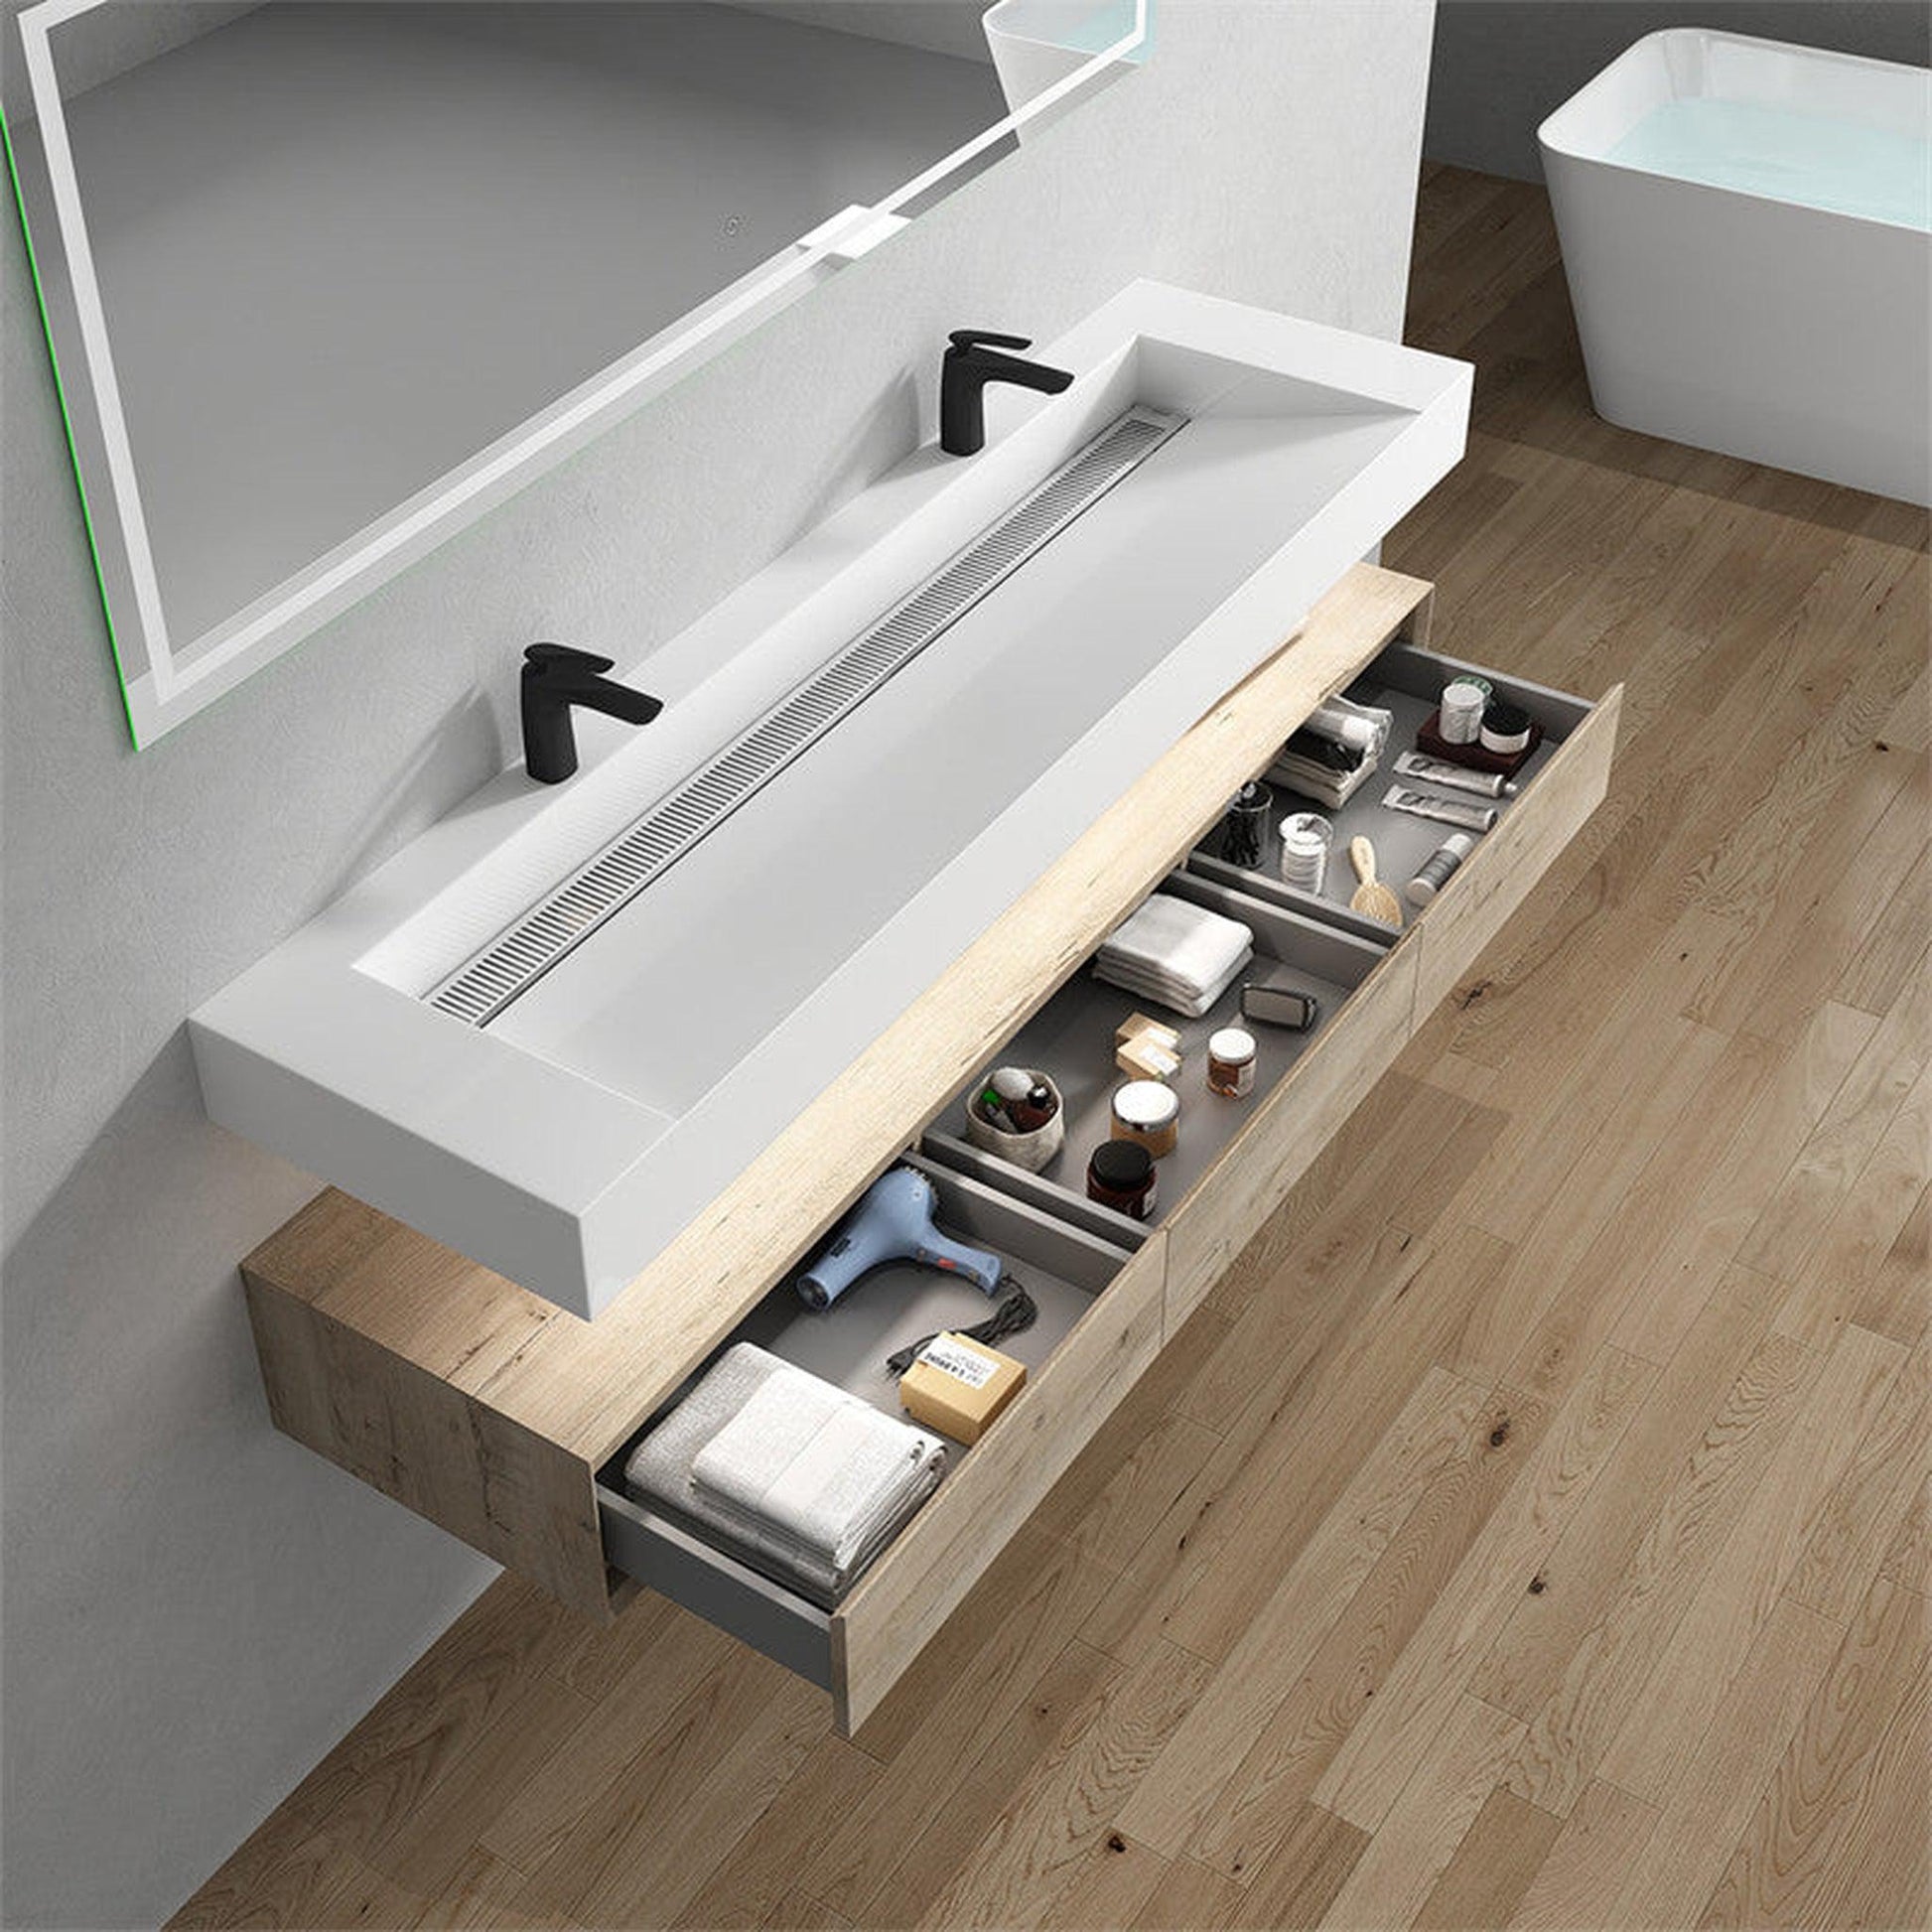 Moreno Bath ALYSA 72" Light Oak Floating Vanity With Double Faucet Holes and Reinforced White Acrylic Sink